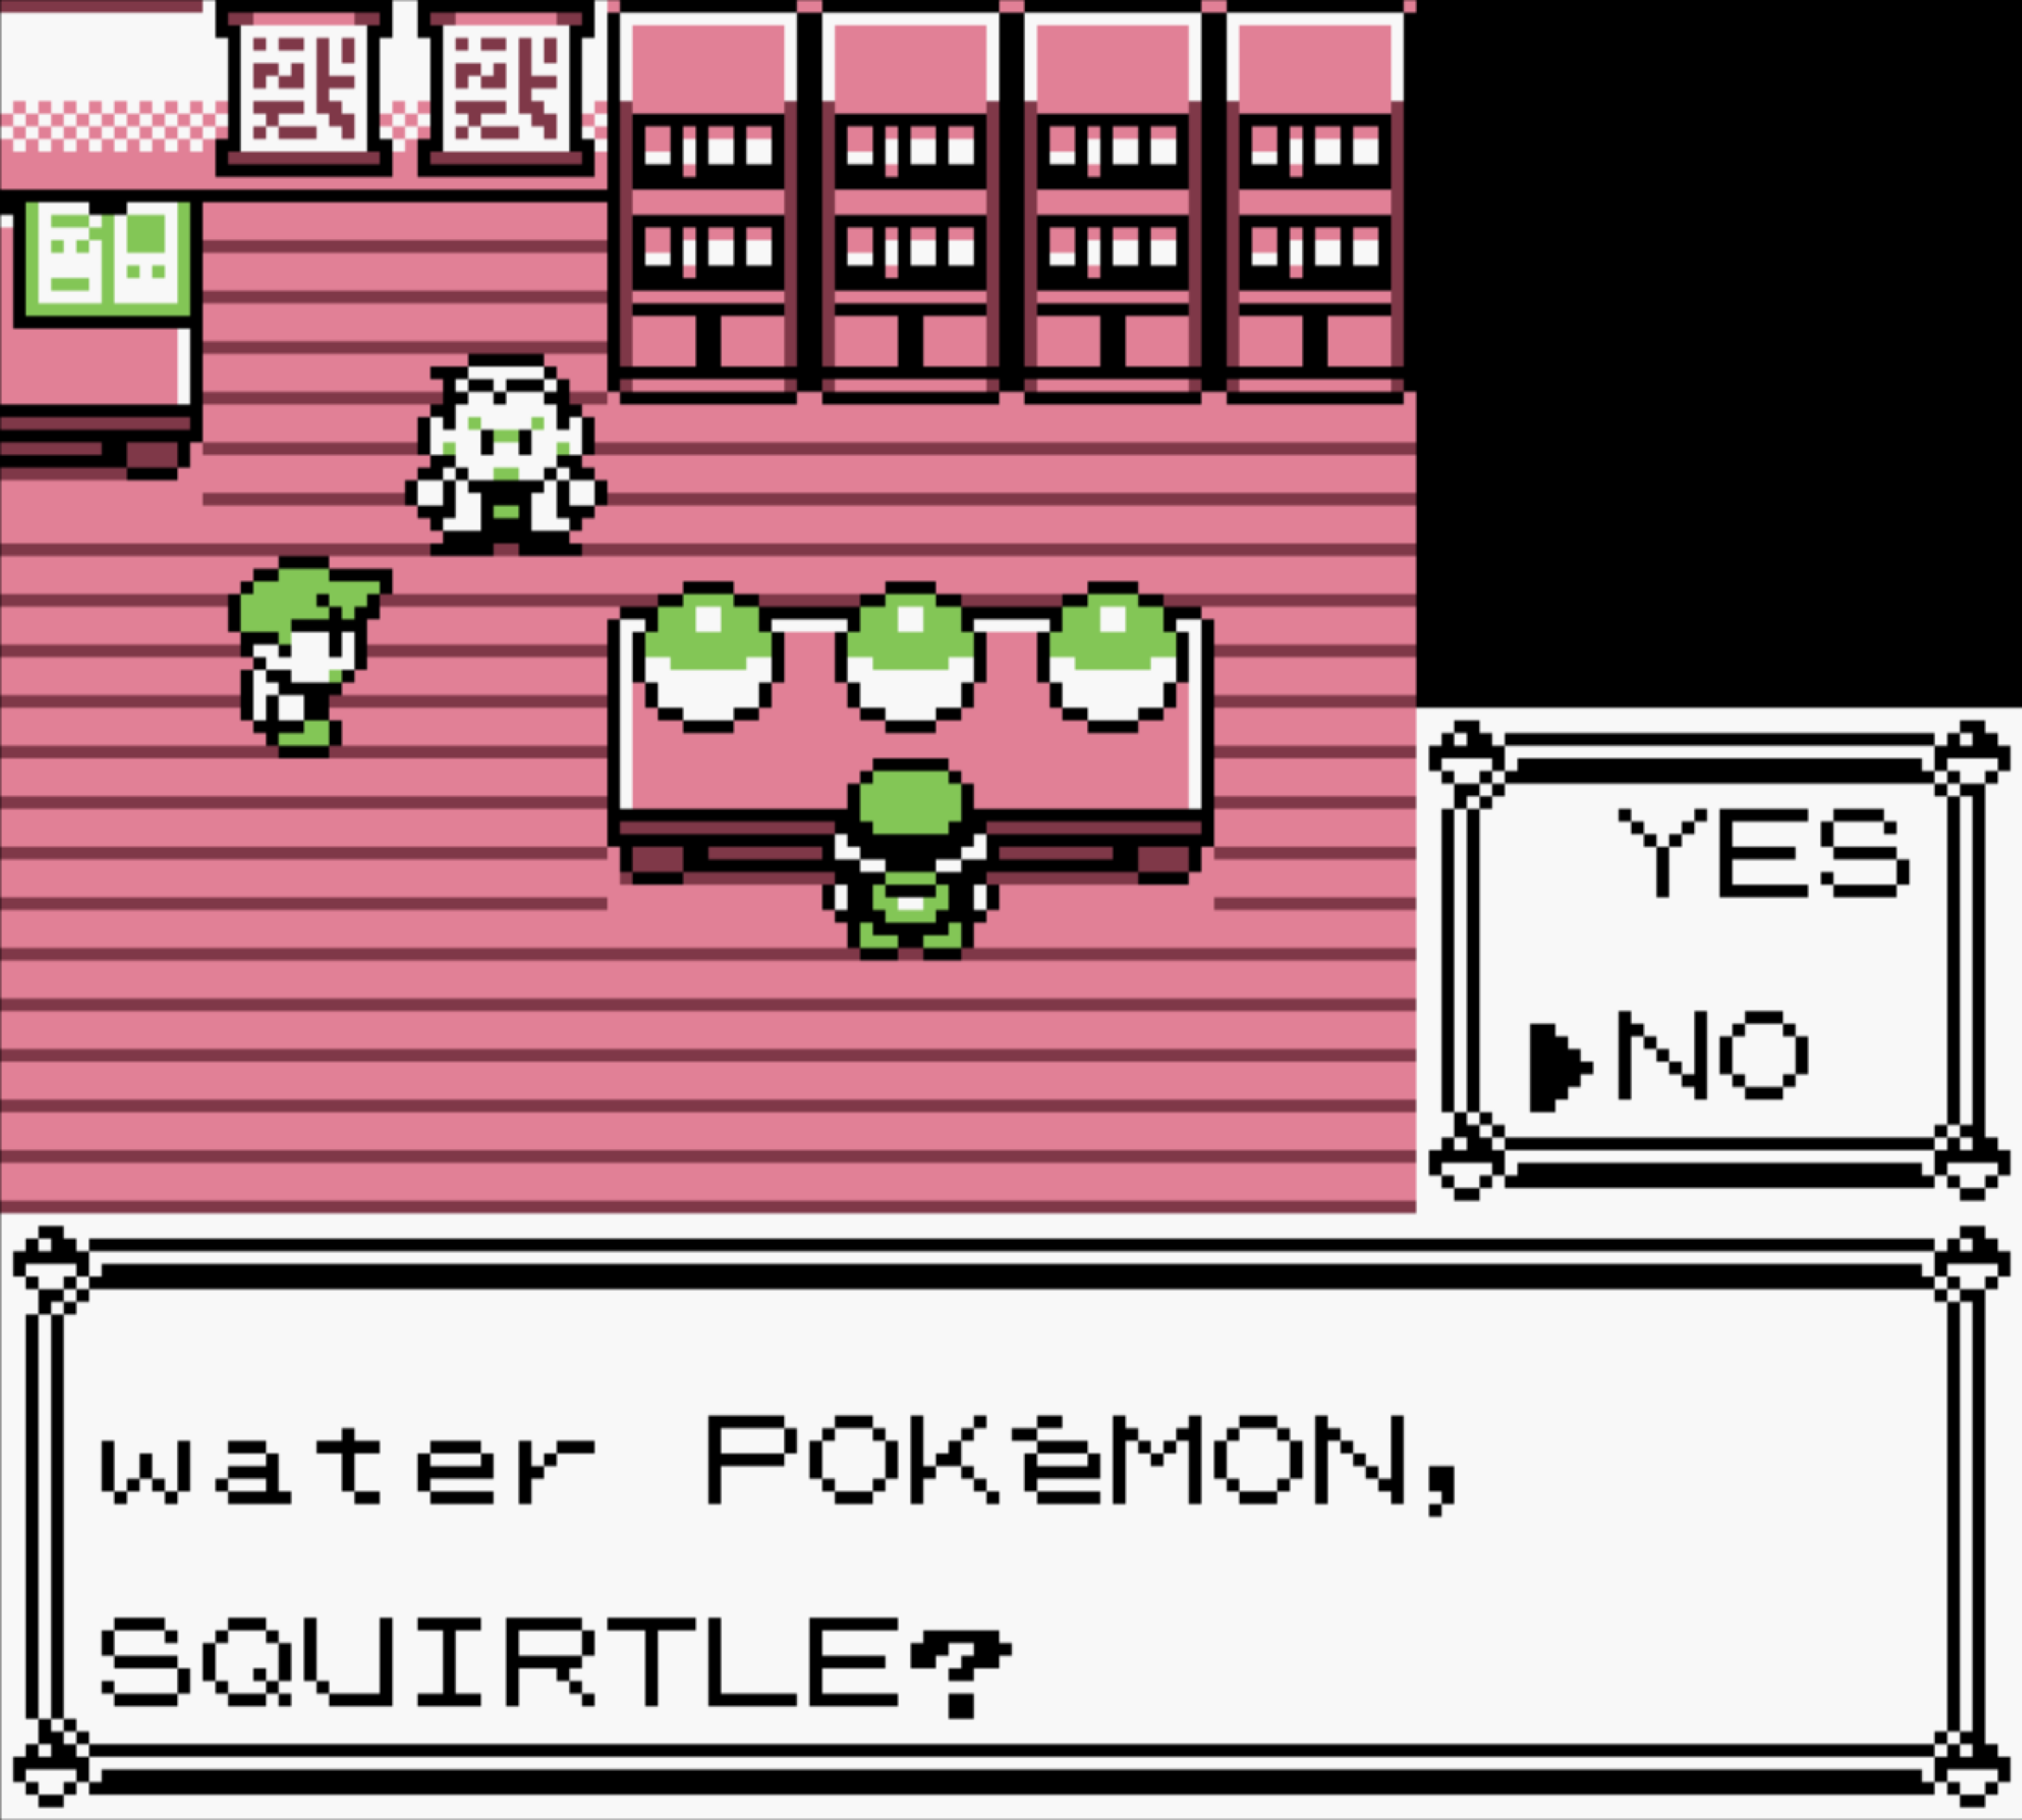 02c-squirtle.png